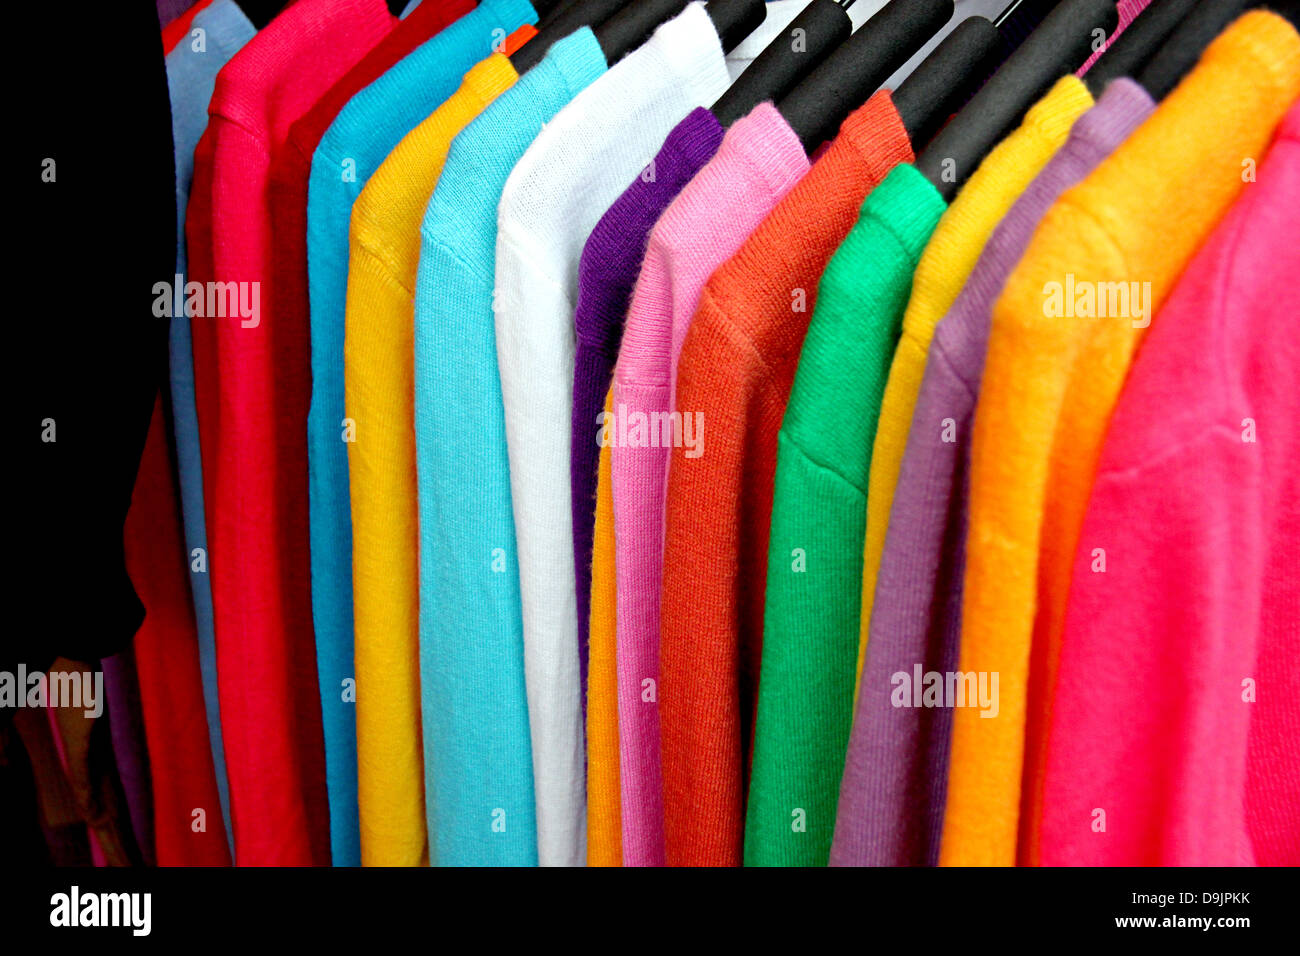 Long sleeves in shop is a Colorful. Stock Photo